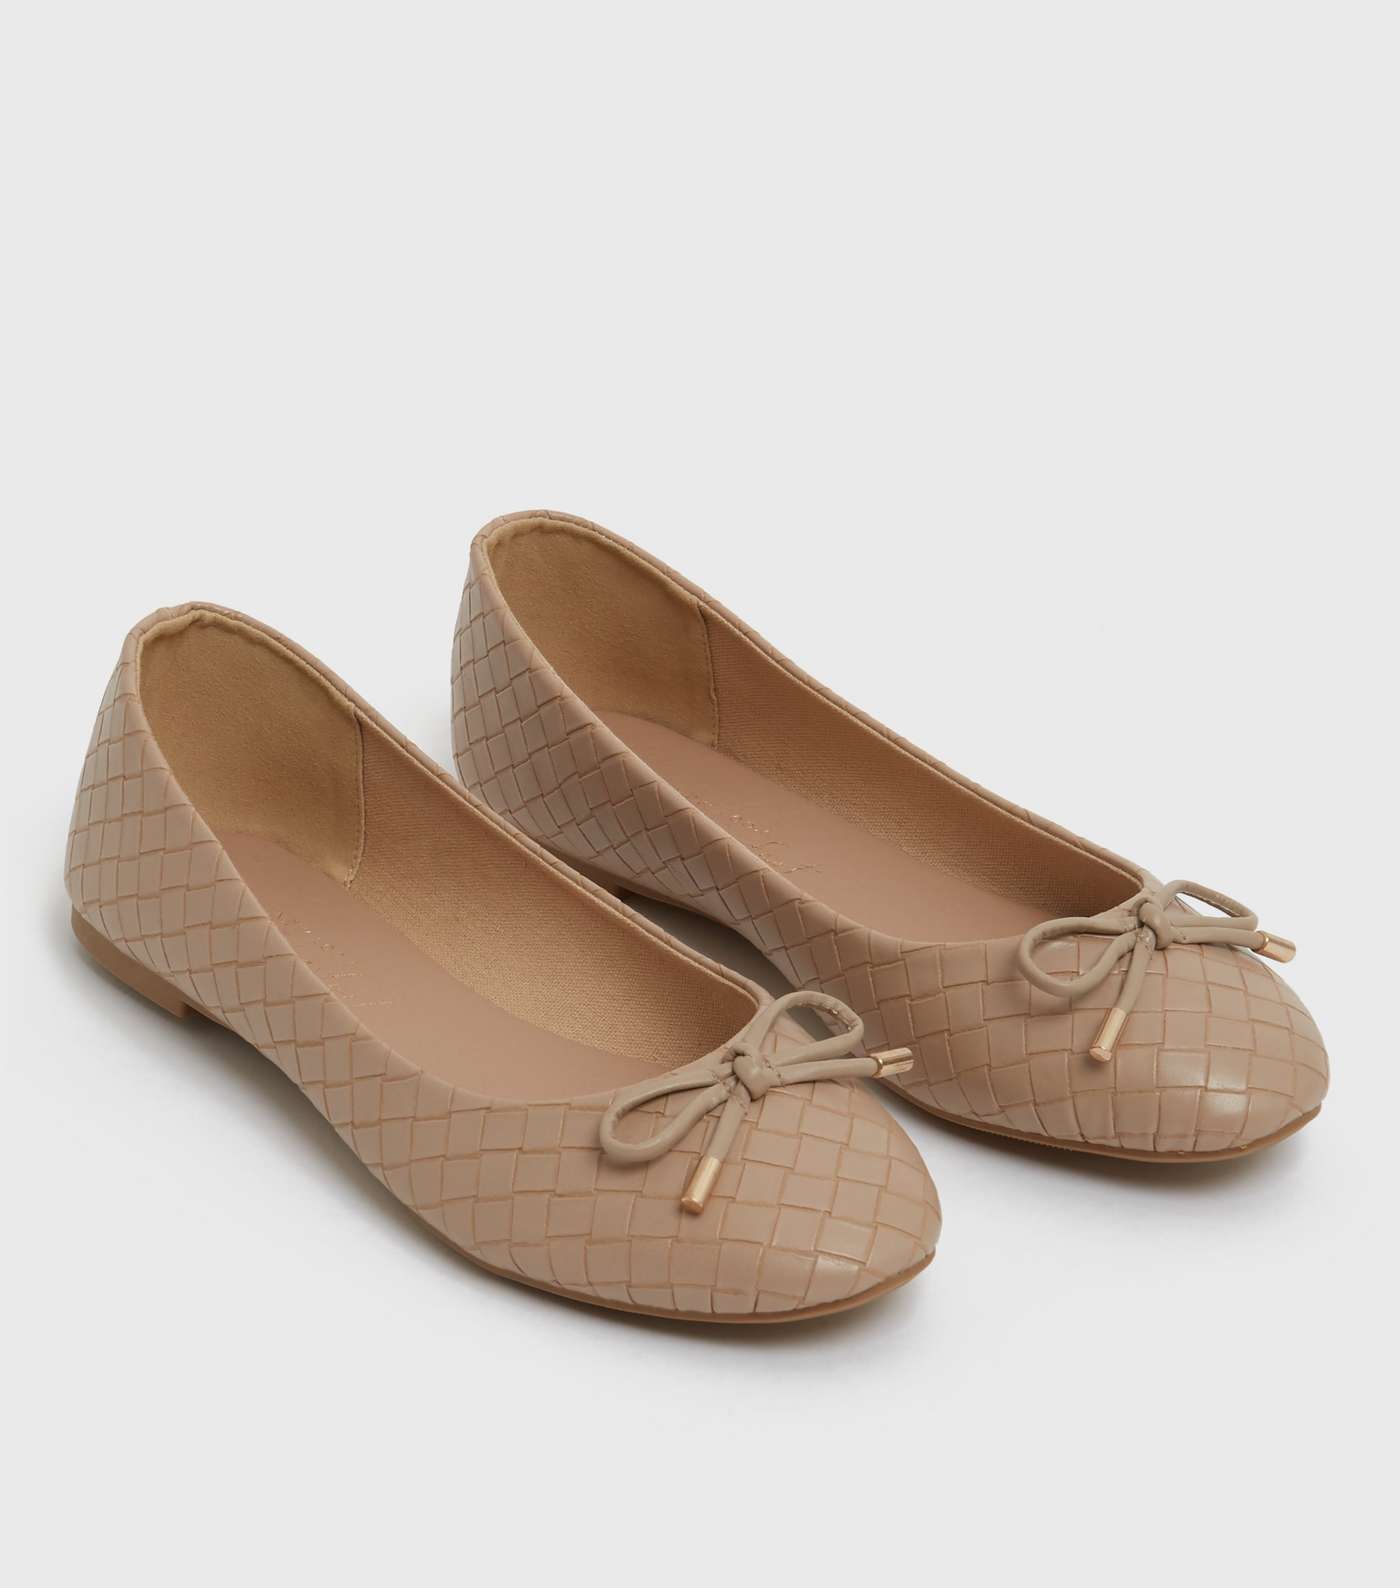 Stone Woven Leather-Look Bow Ballet Pumps Image 3